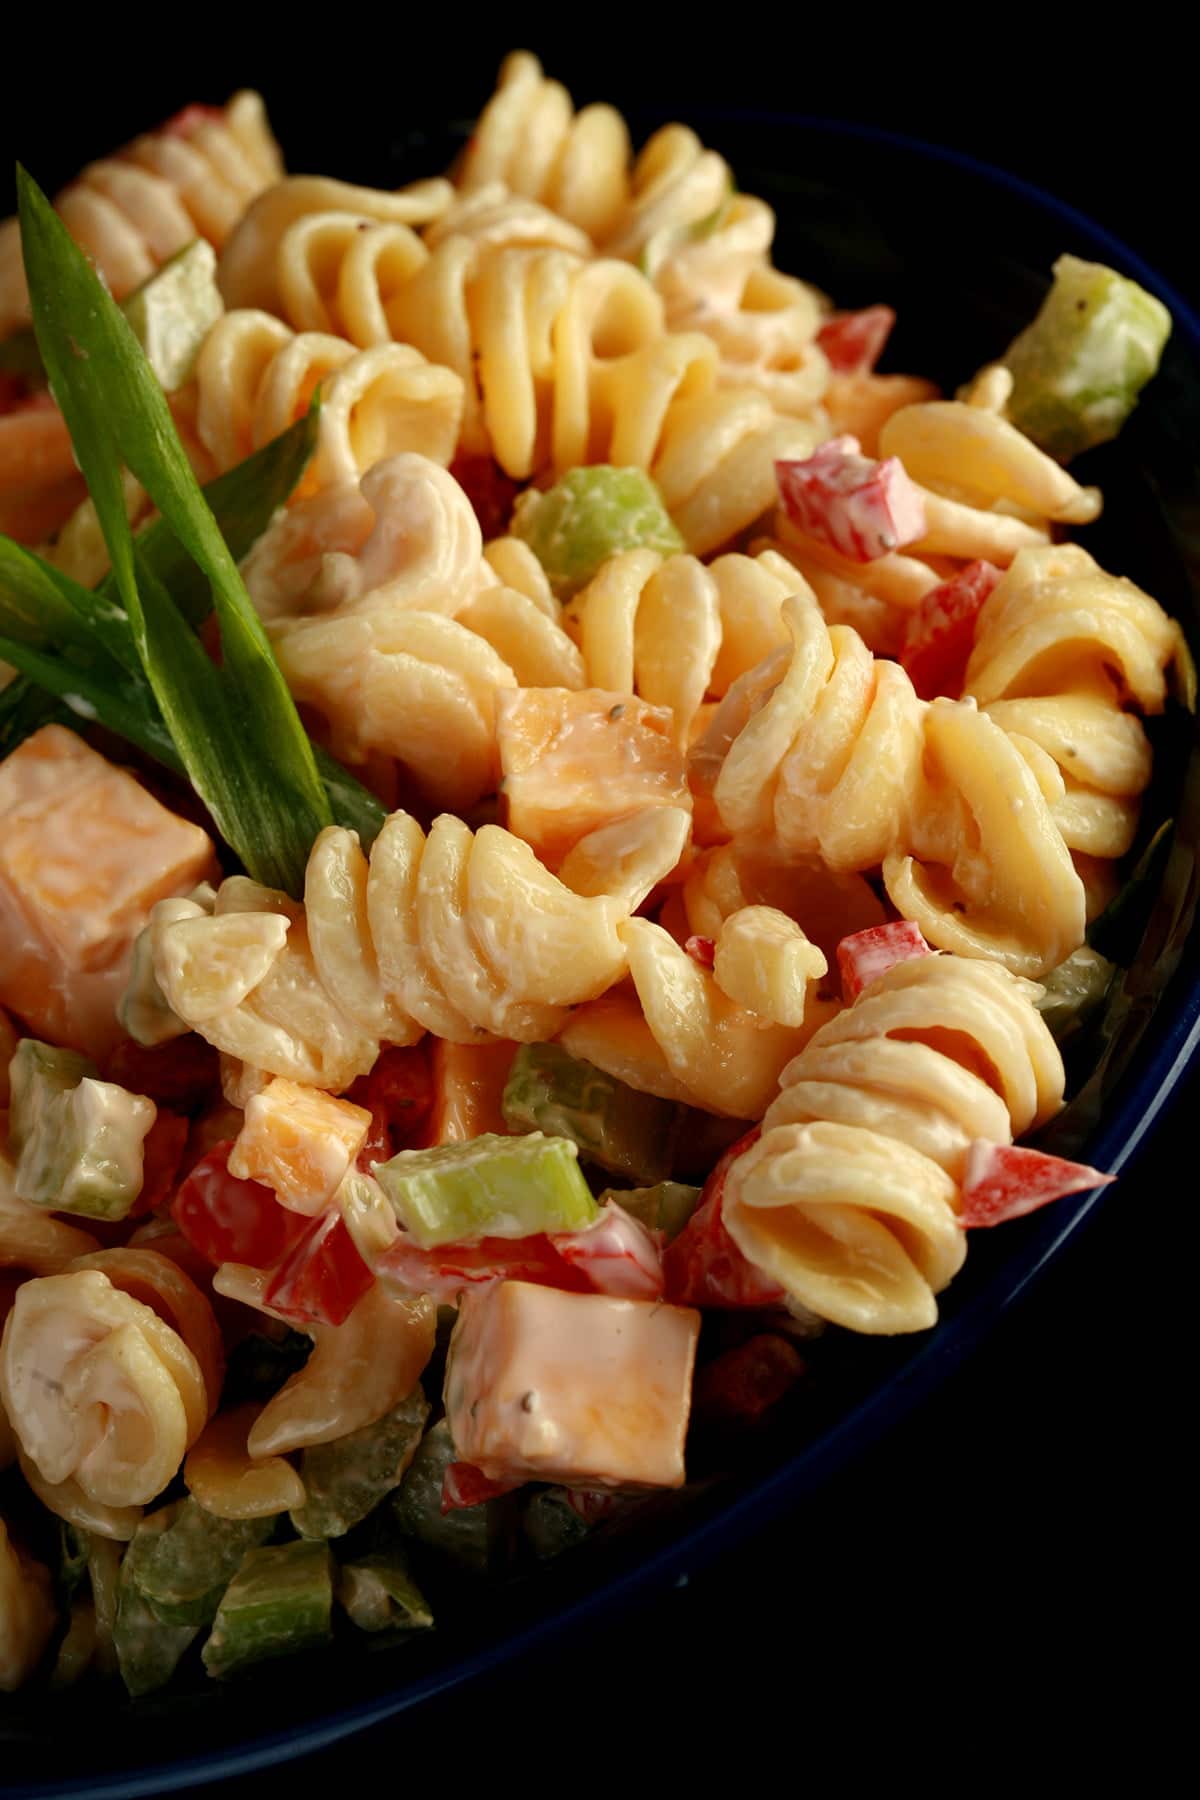 A blue bowl overflowing with a rotini based macaroni salad. Cubes of cheese, red peppers, celery slices, and green onion are all visible.